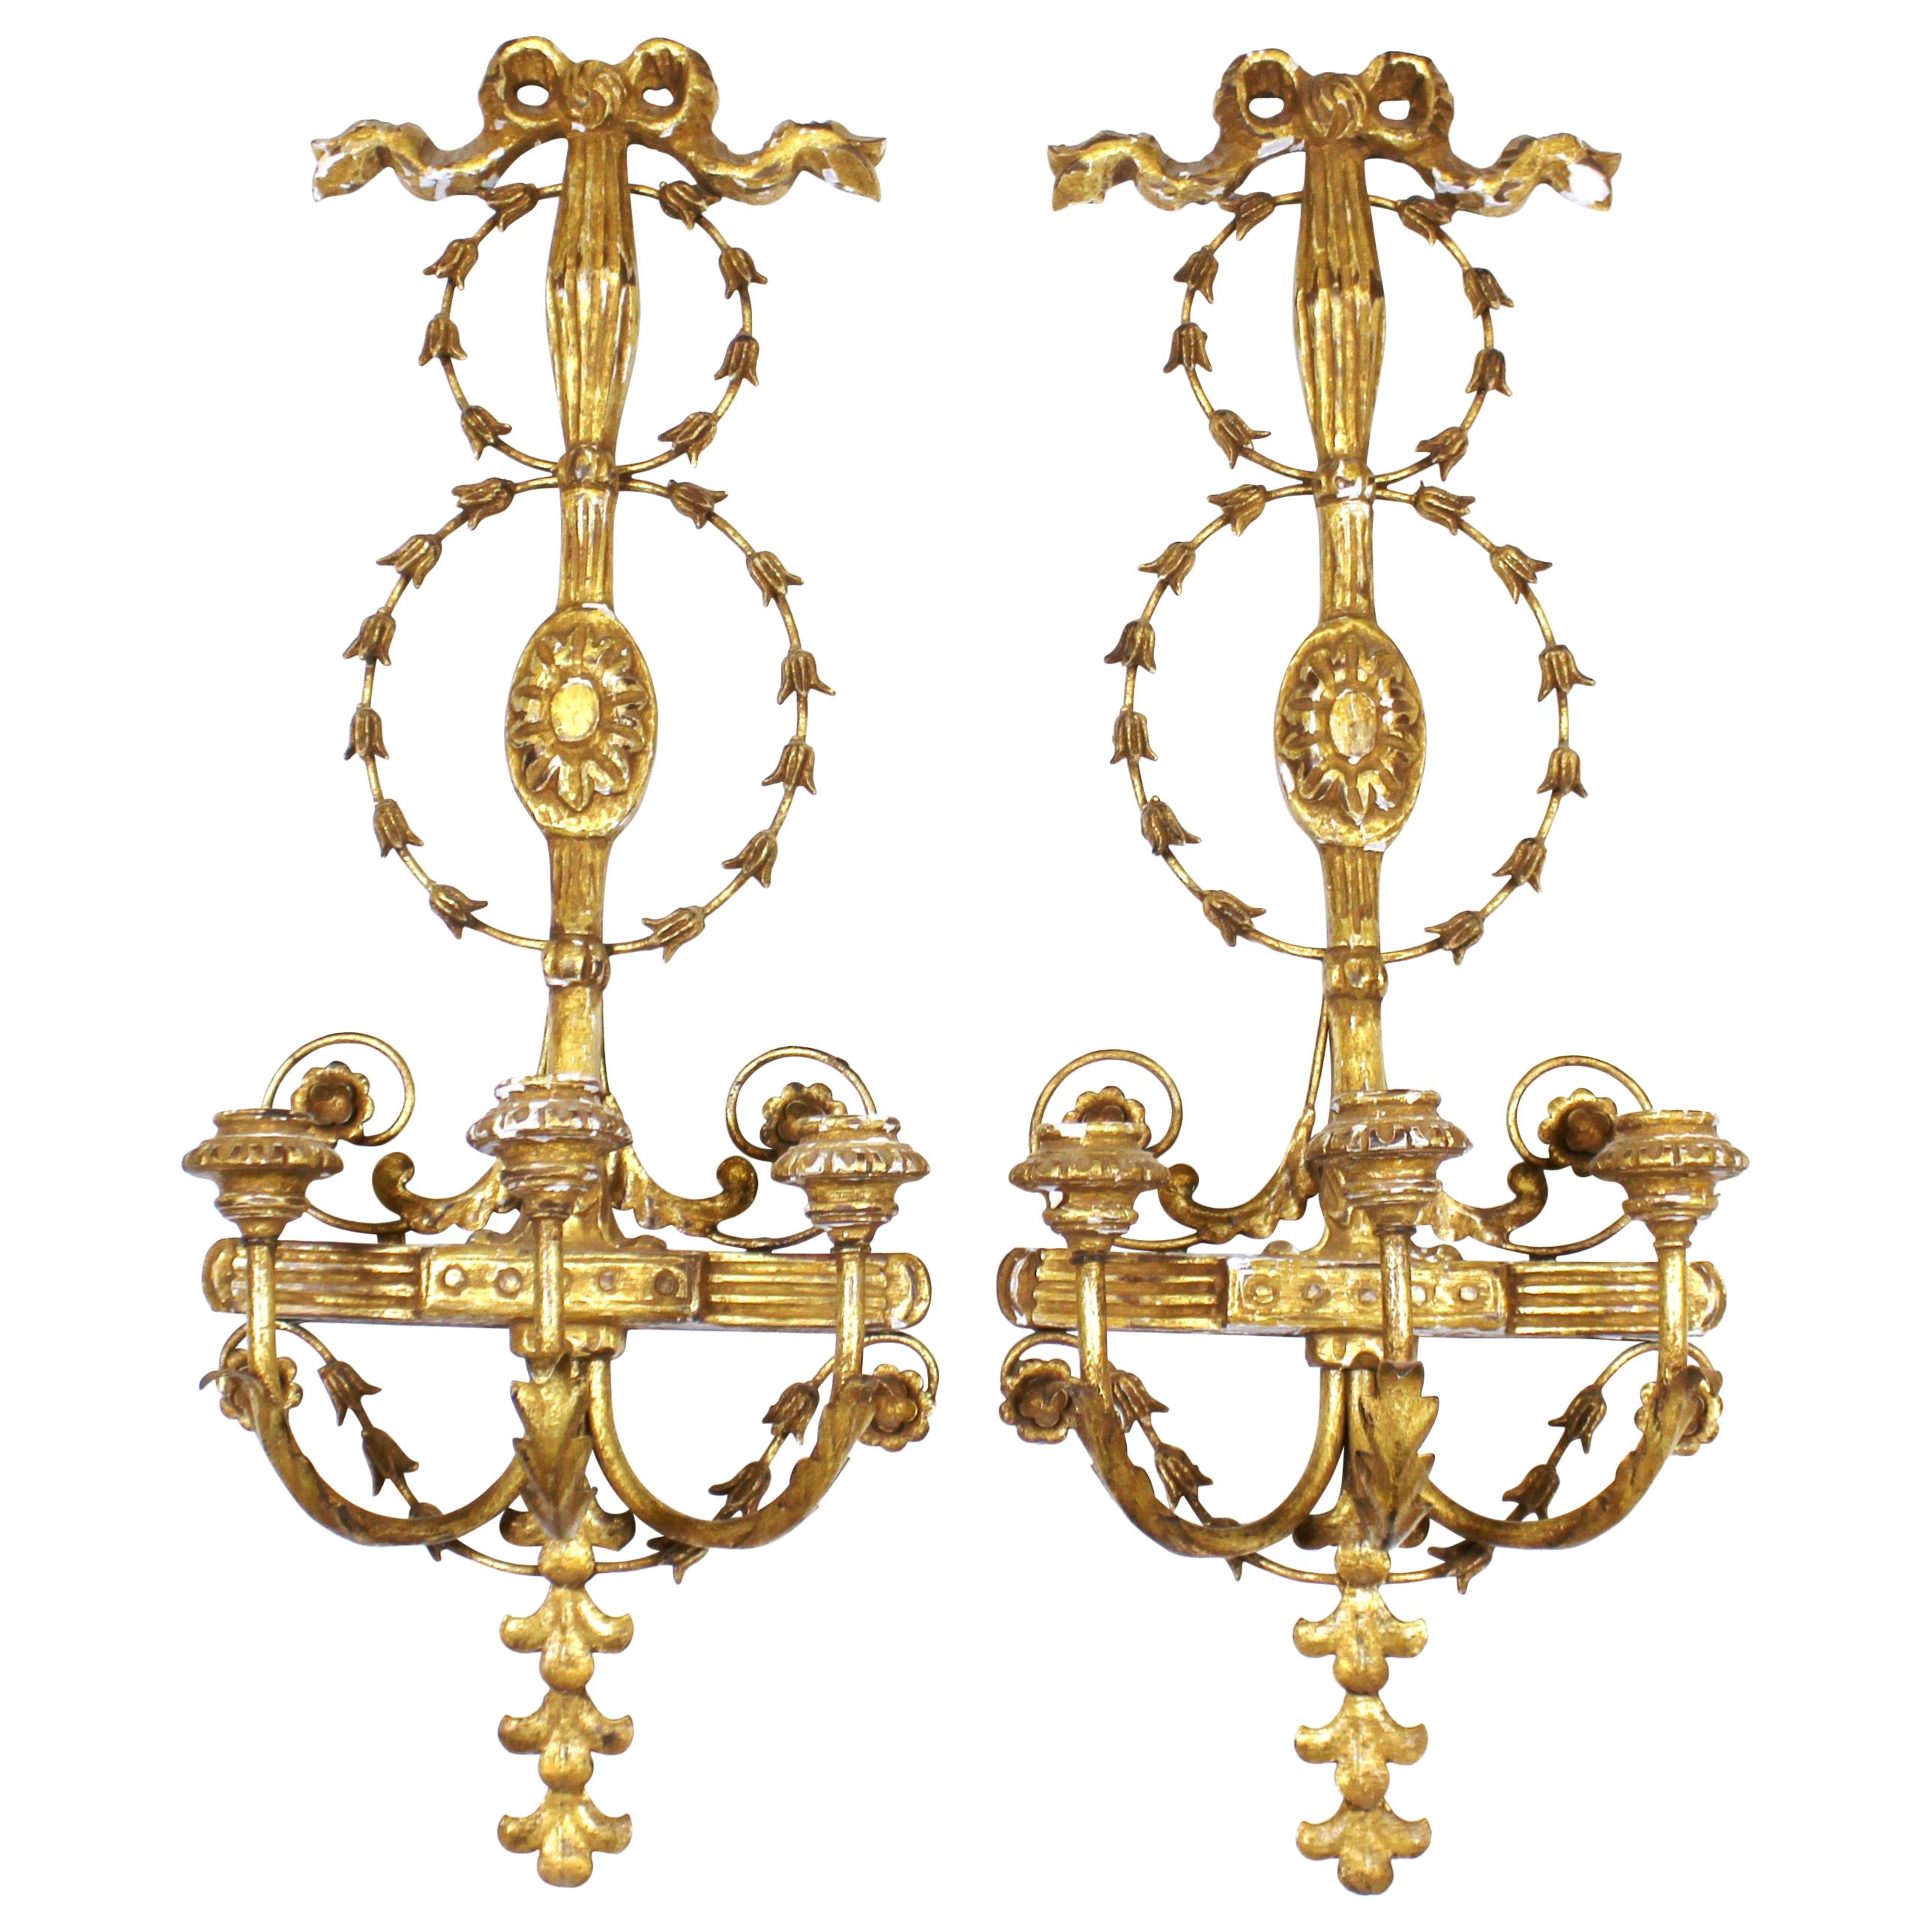 Italian Empire Revival Style Giltwood Wall Candle Sconces